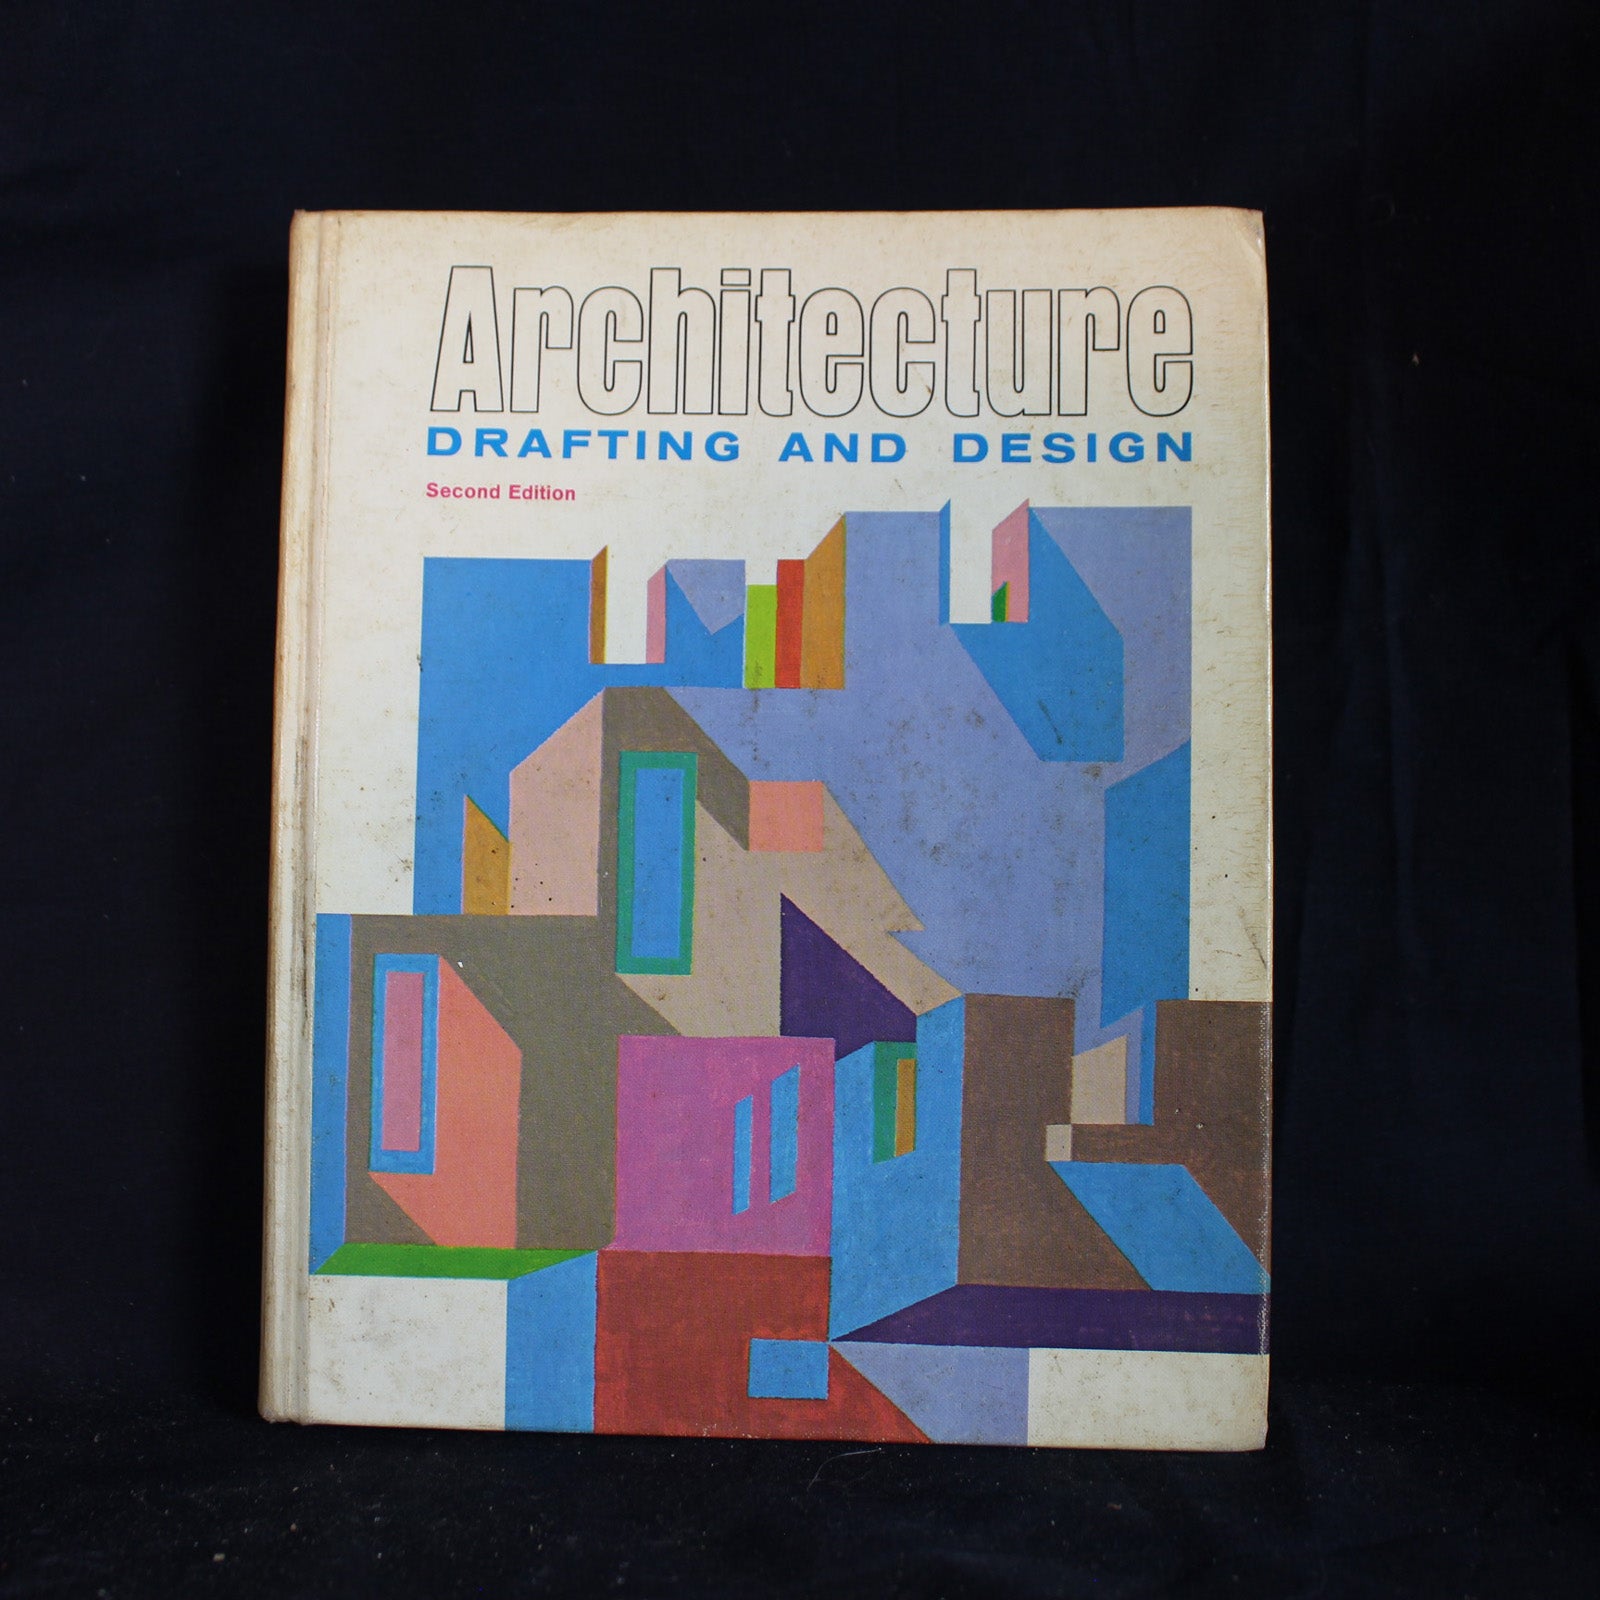 Vintage Hardcover Architecture: Drafting and Design Second Edition, 1975